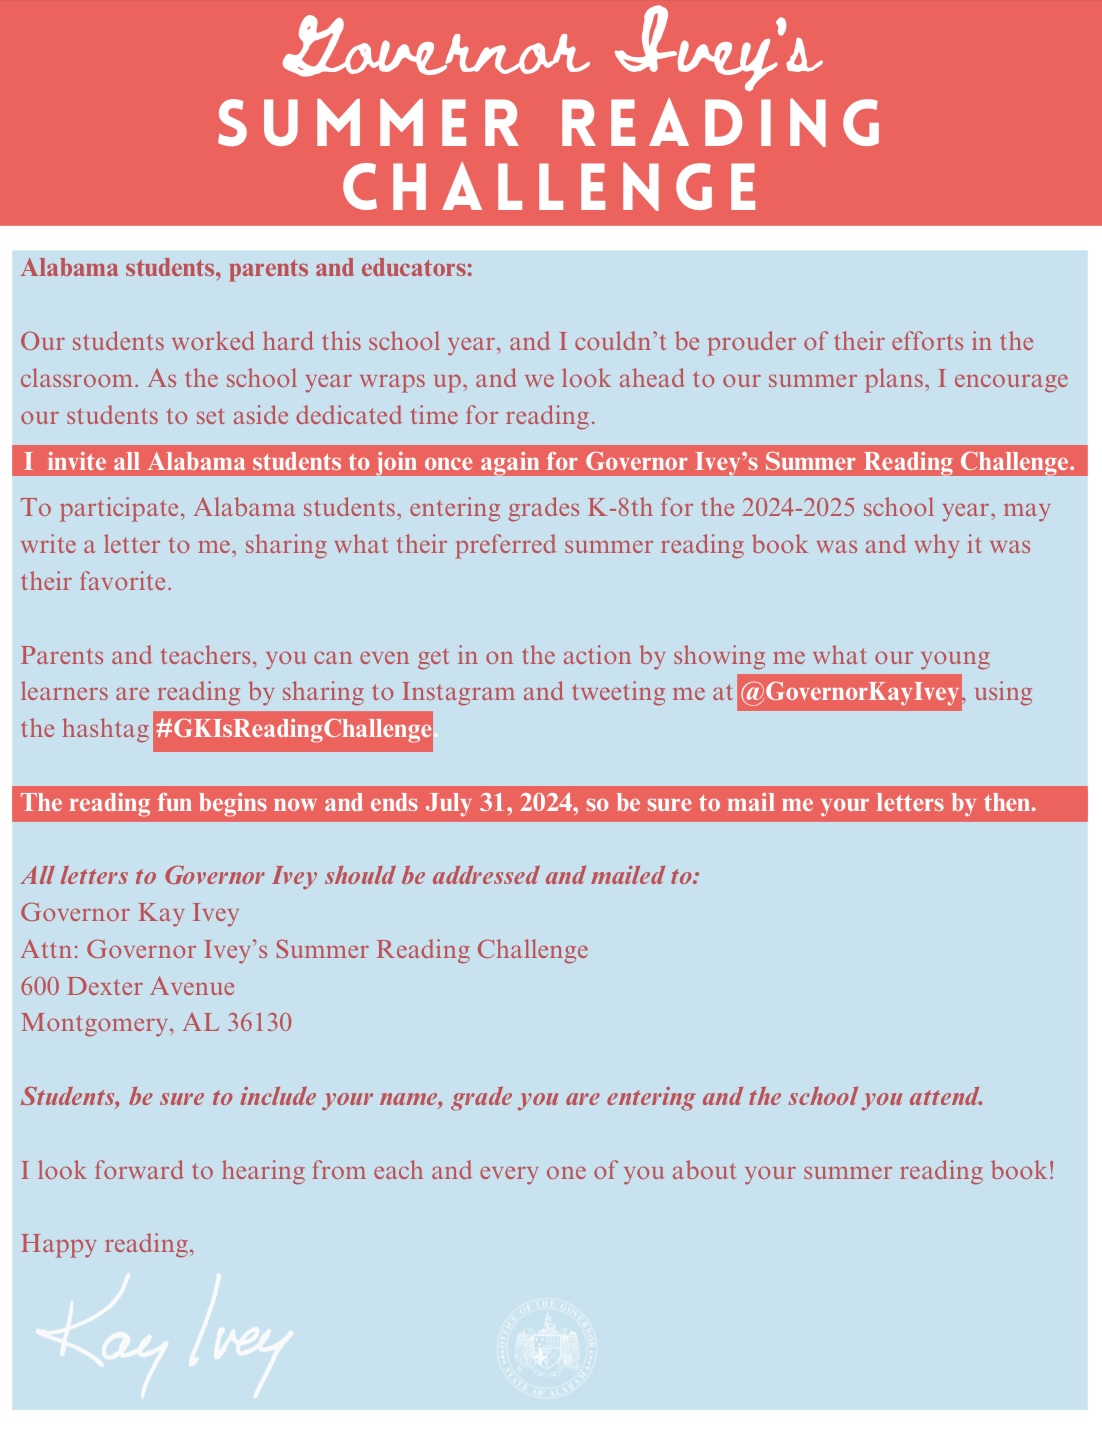 Governor Ivey's Summer Reading Challenge Flyer